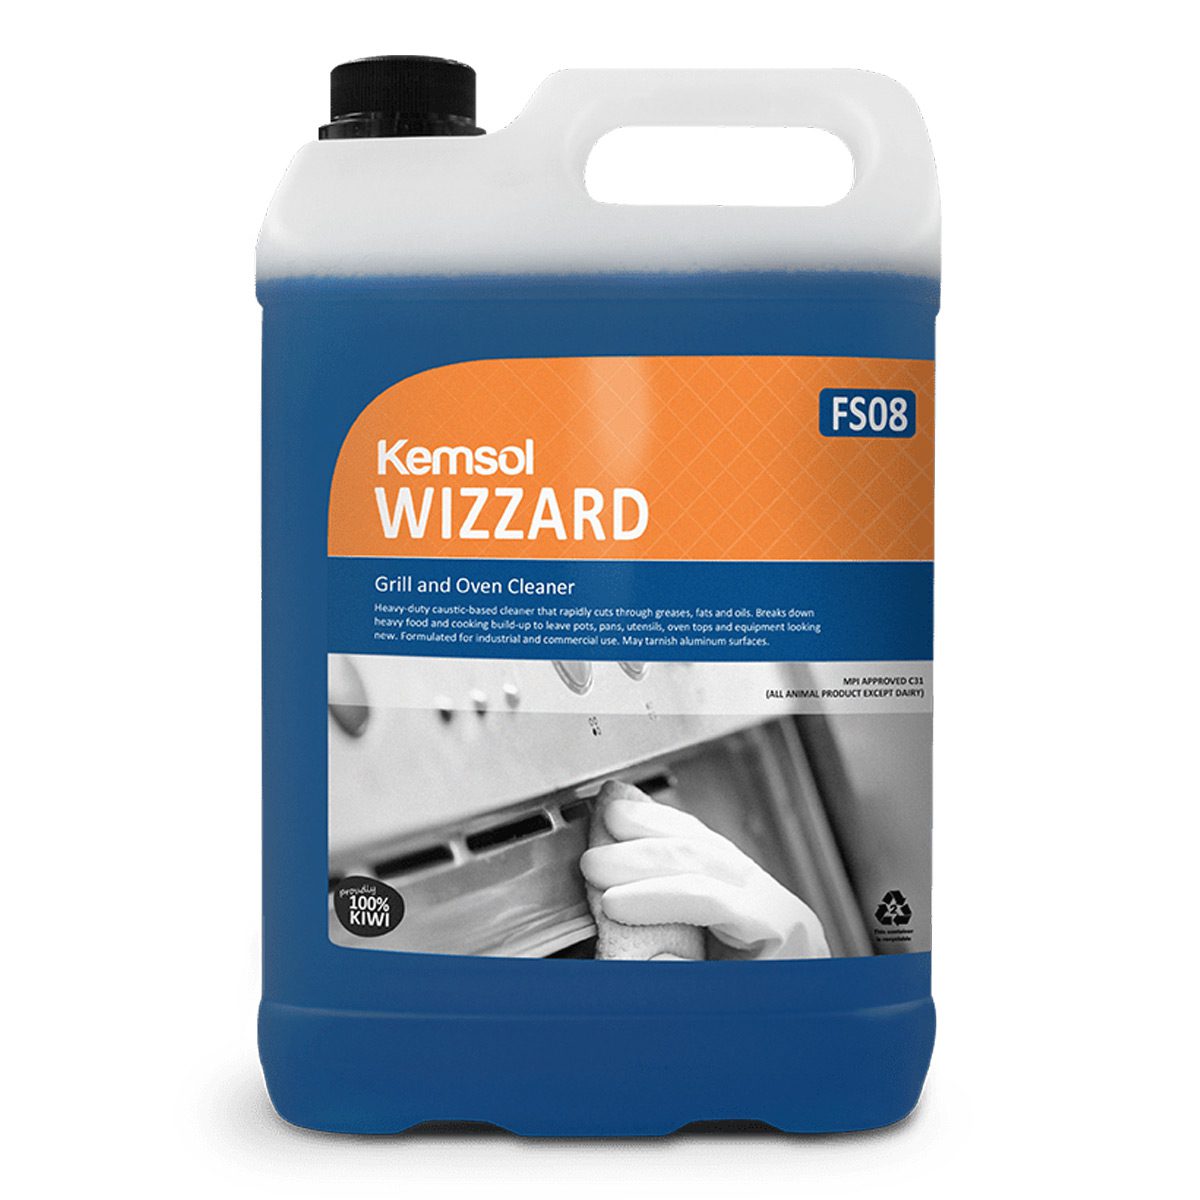 cleaning-products-kitchen-multipurpose-kemsol-5L-litre-wizzard-oven-cleaner-heavy-duty-caustic-based-cleaner-cuts-through-greases-fats-oils-breaks-down-heavy-food-cooking-vjs-distributors-KWIZZ